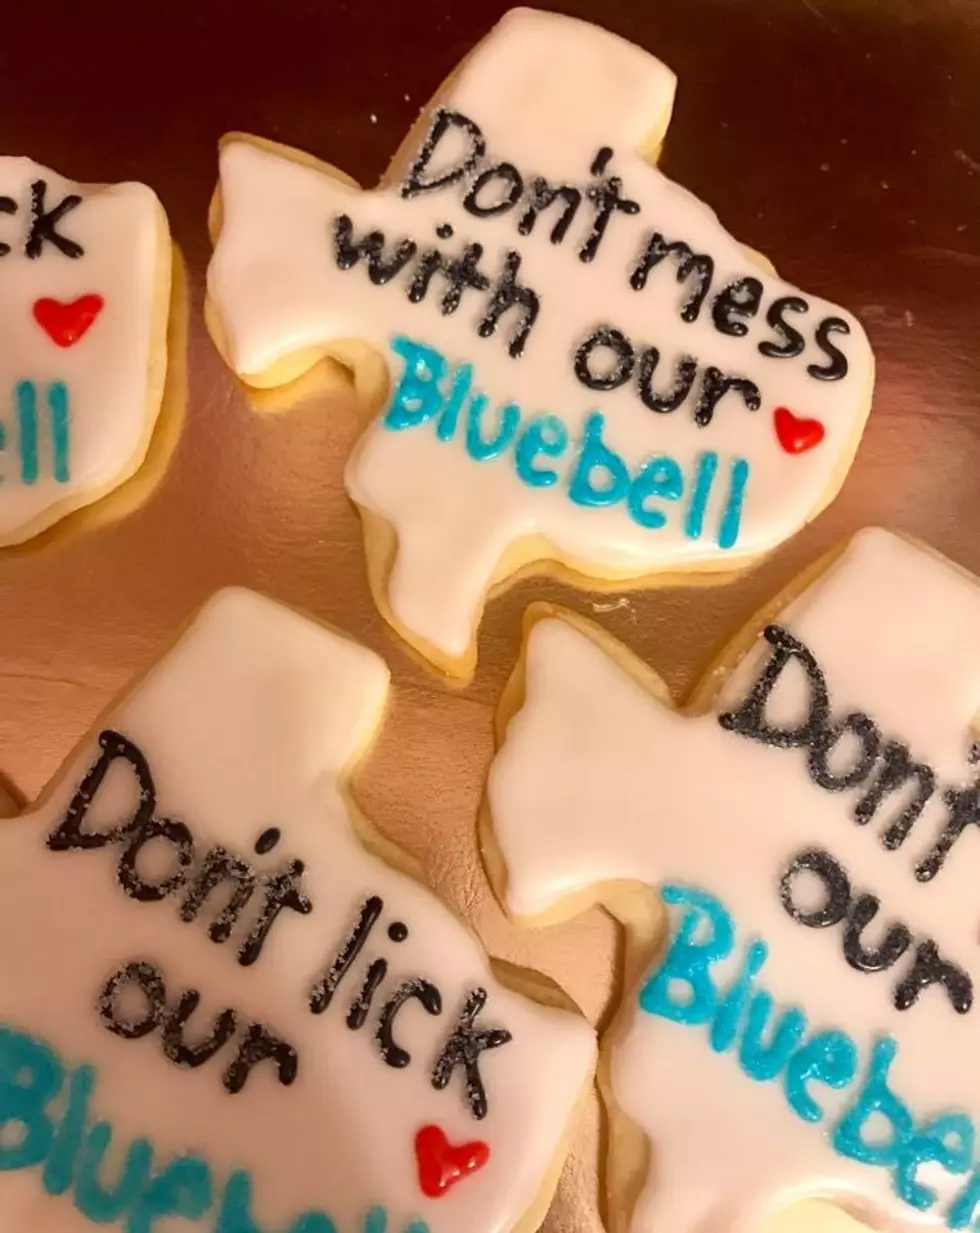 These Cookies Sum Up How All Texas Feels